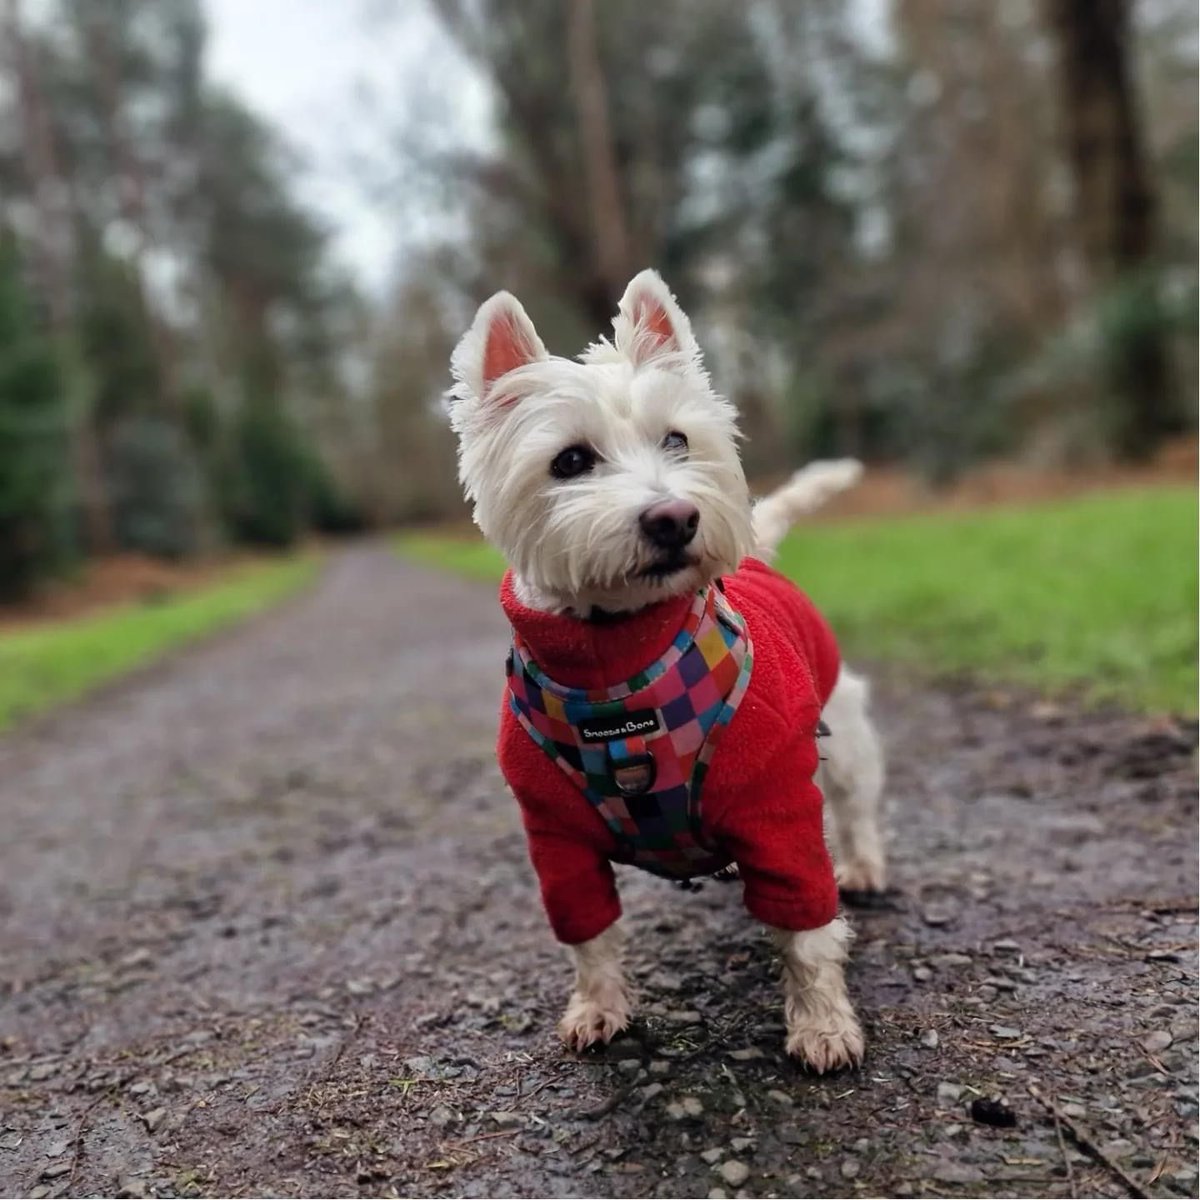 @ClassicFM @mrdanwalker This is our Westie Little B, affectionately known as #Bogtrotter .. loves her morning walkies and finding any muddy puddles then snoozing to Dan on #ClassicFM absolutely no westitude at all…much! 🐶🐾💕